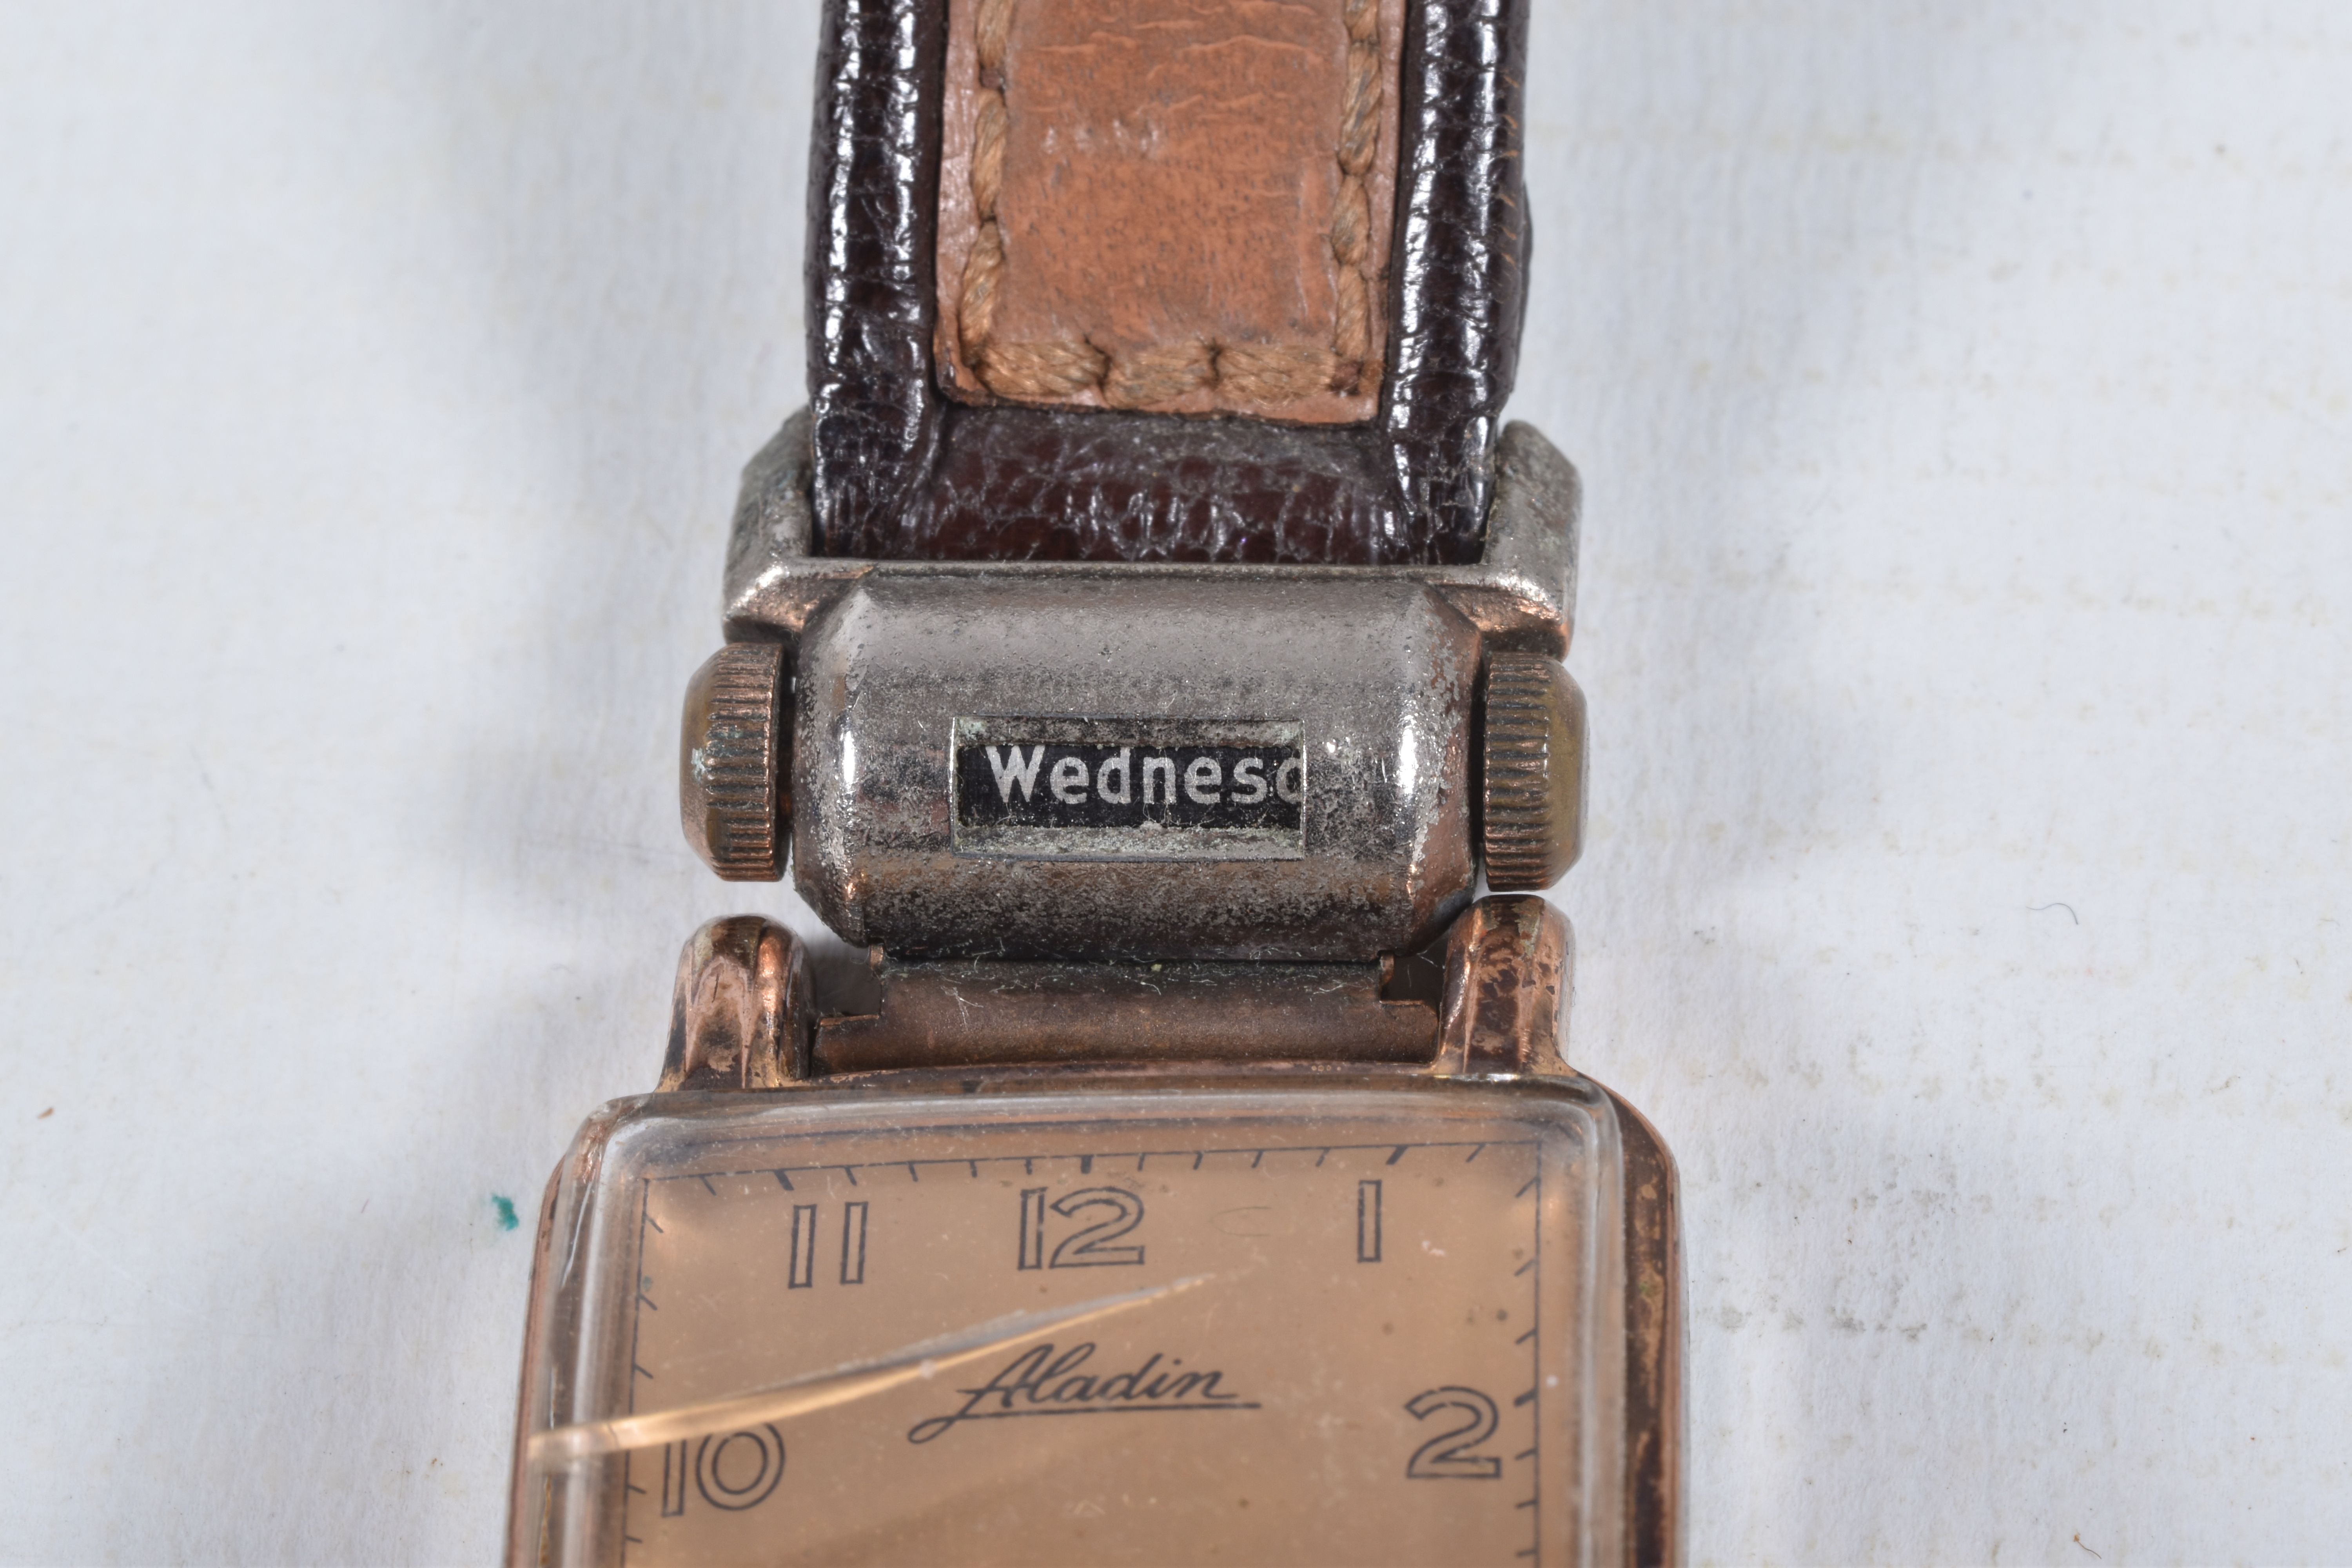 A GENTS 'ALADIN' WRISTWATCH, manual wind, rectangular gold tone dial signed 'Aladin', Arabic - Image 4 of 9